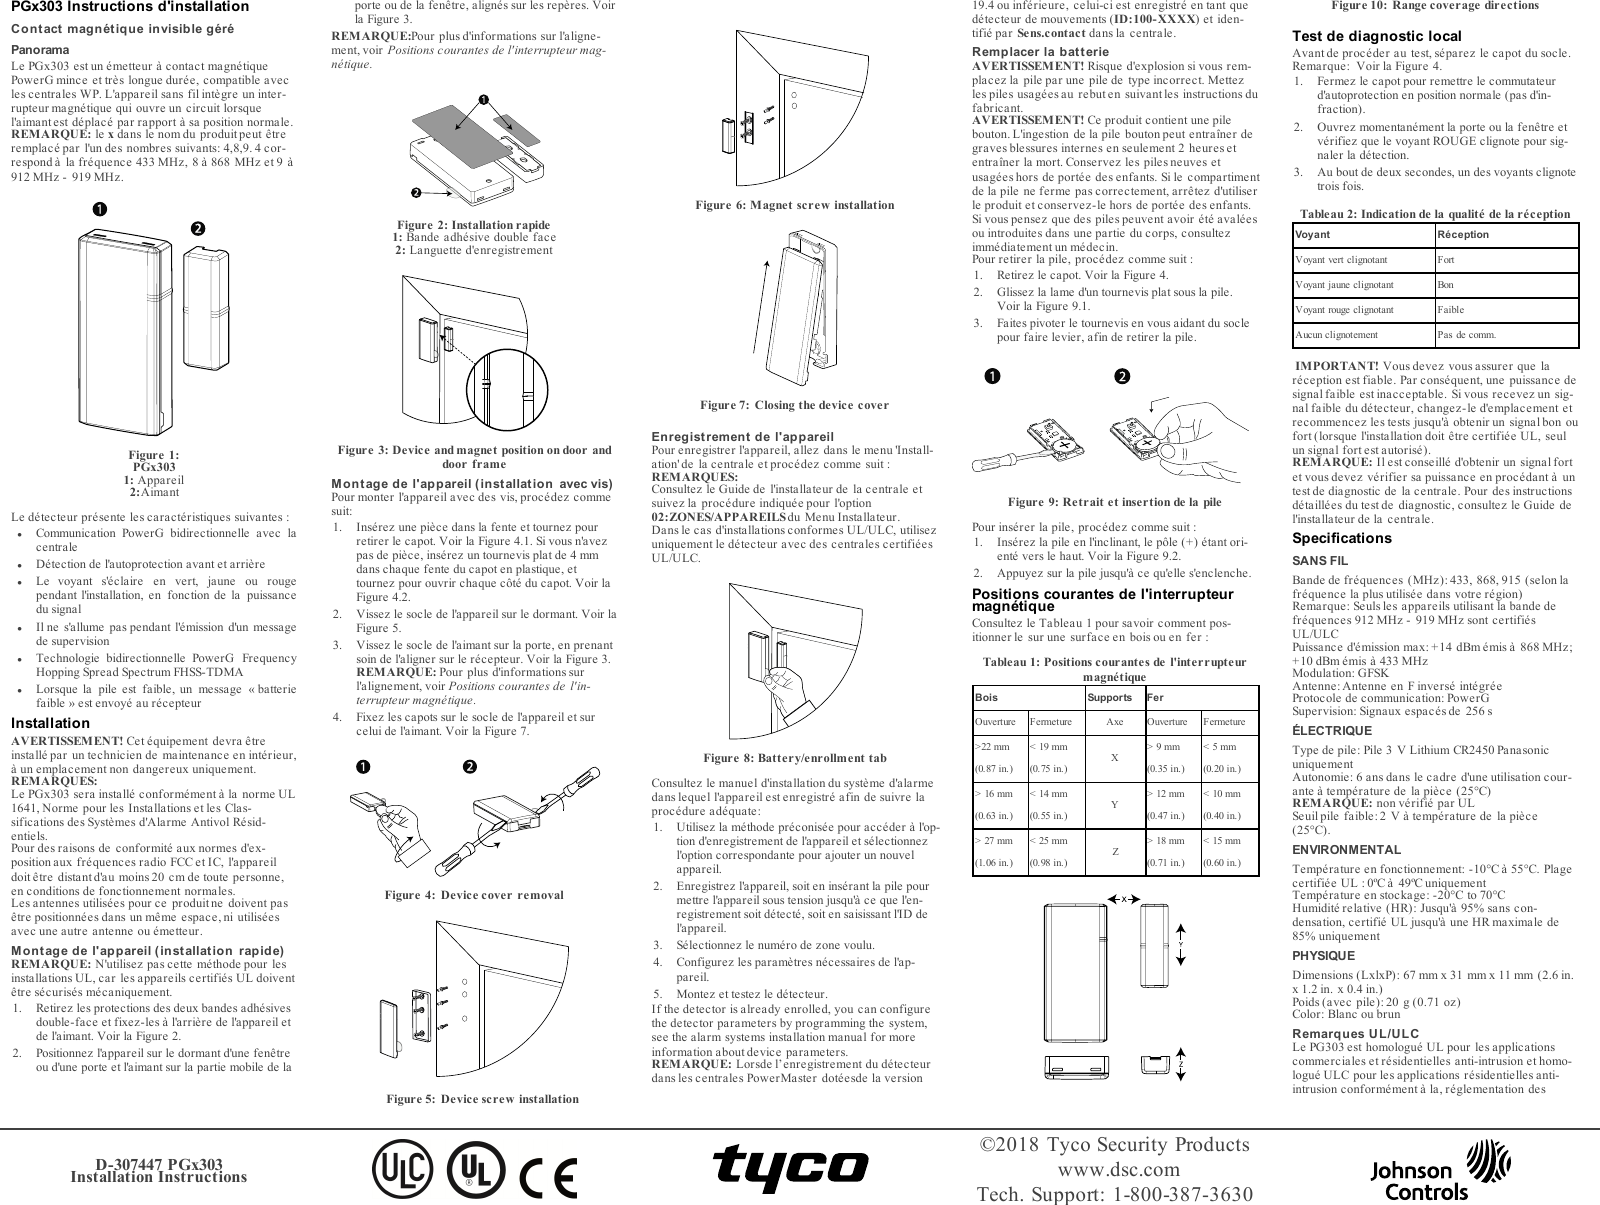 Page 3 of Tyco Safety Canada 18PG9303 Wireless magnetic contact User Manual PGX303 installation instructions